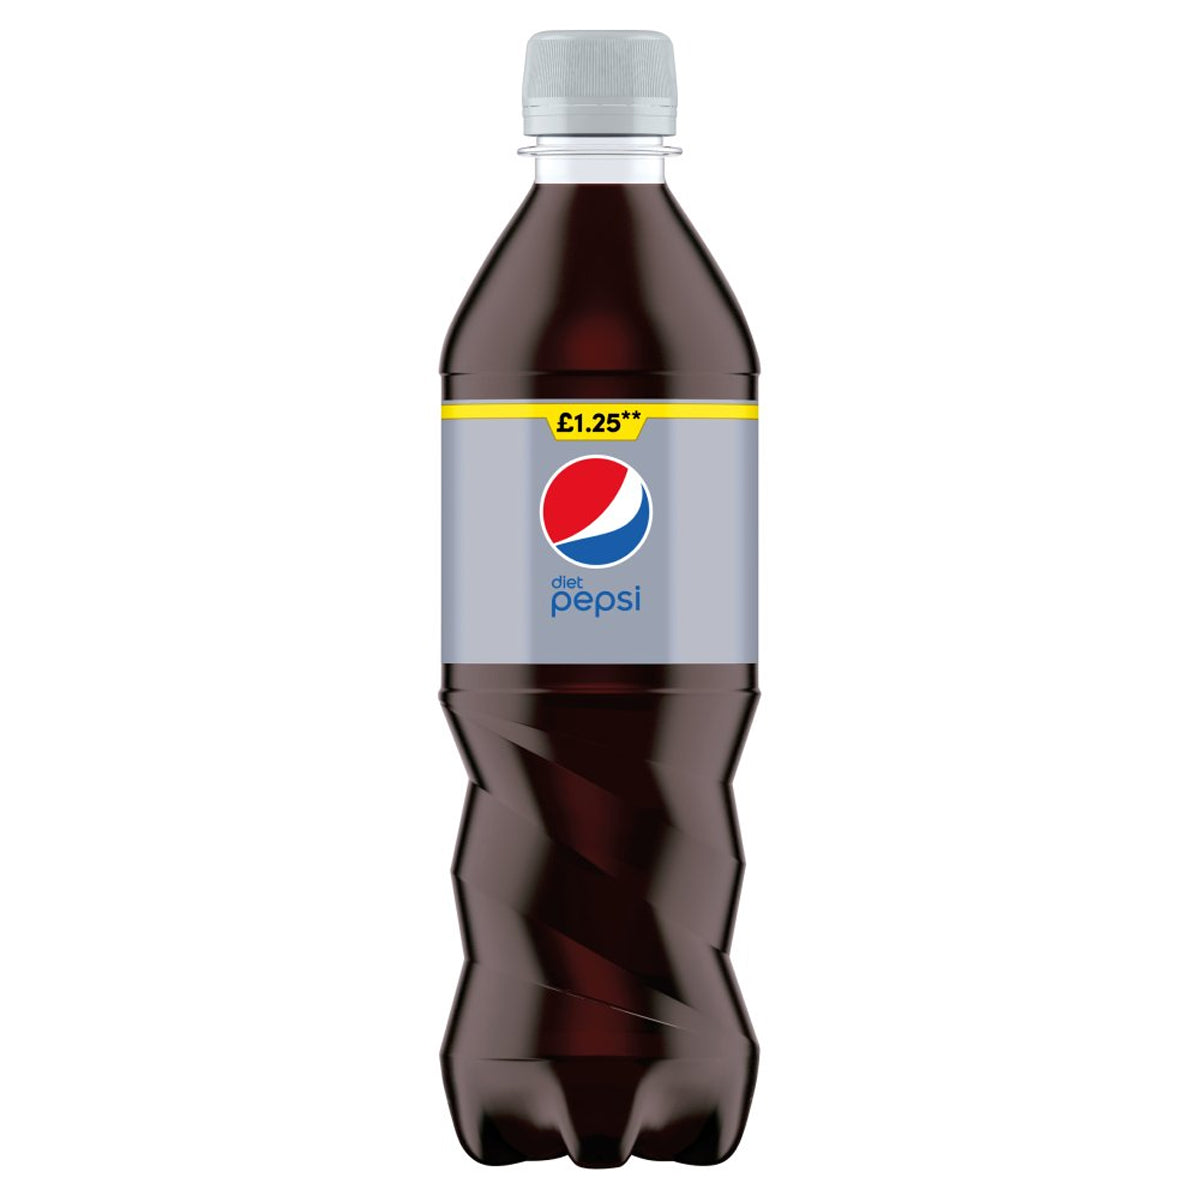 A Pepsi - Diet Cola Bottle - 500ml on a white background.